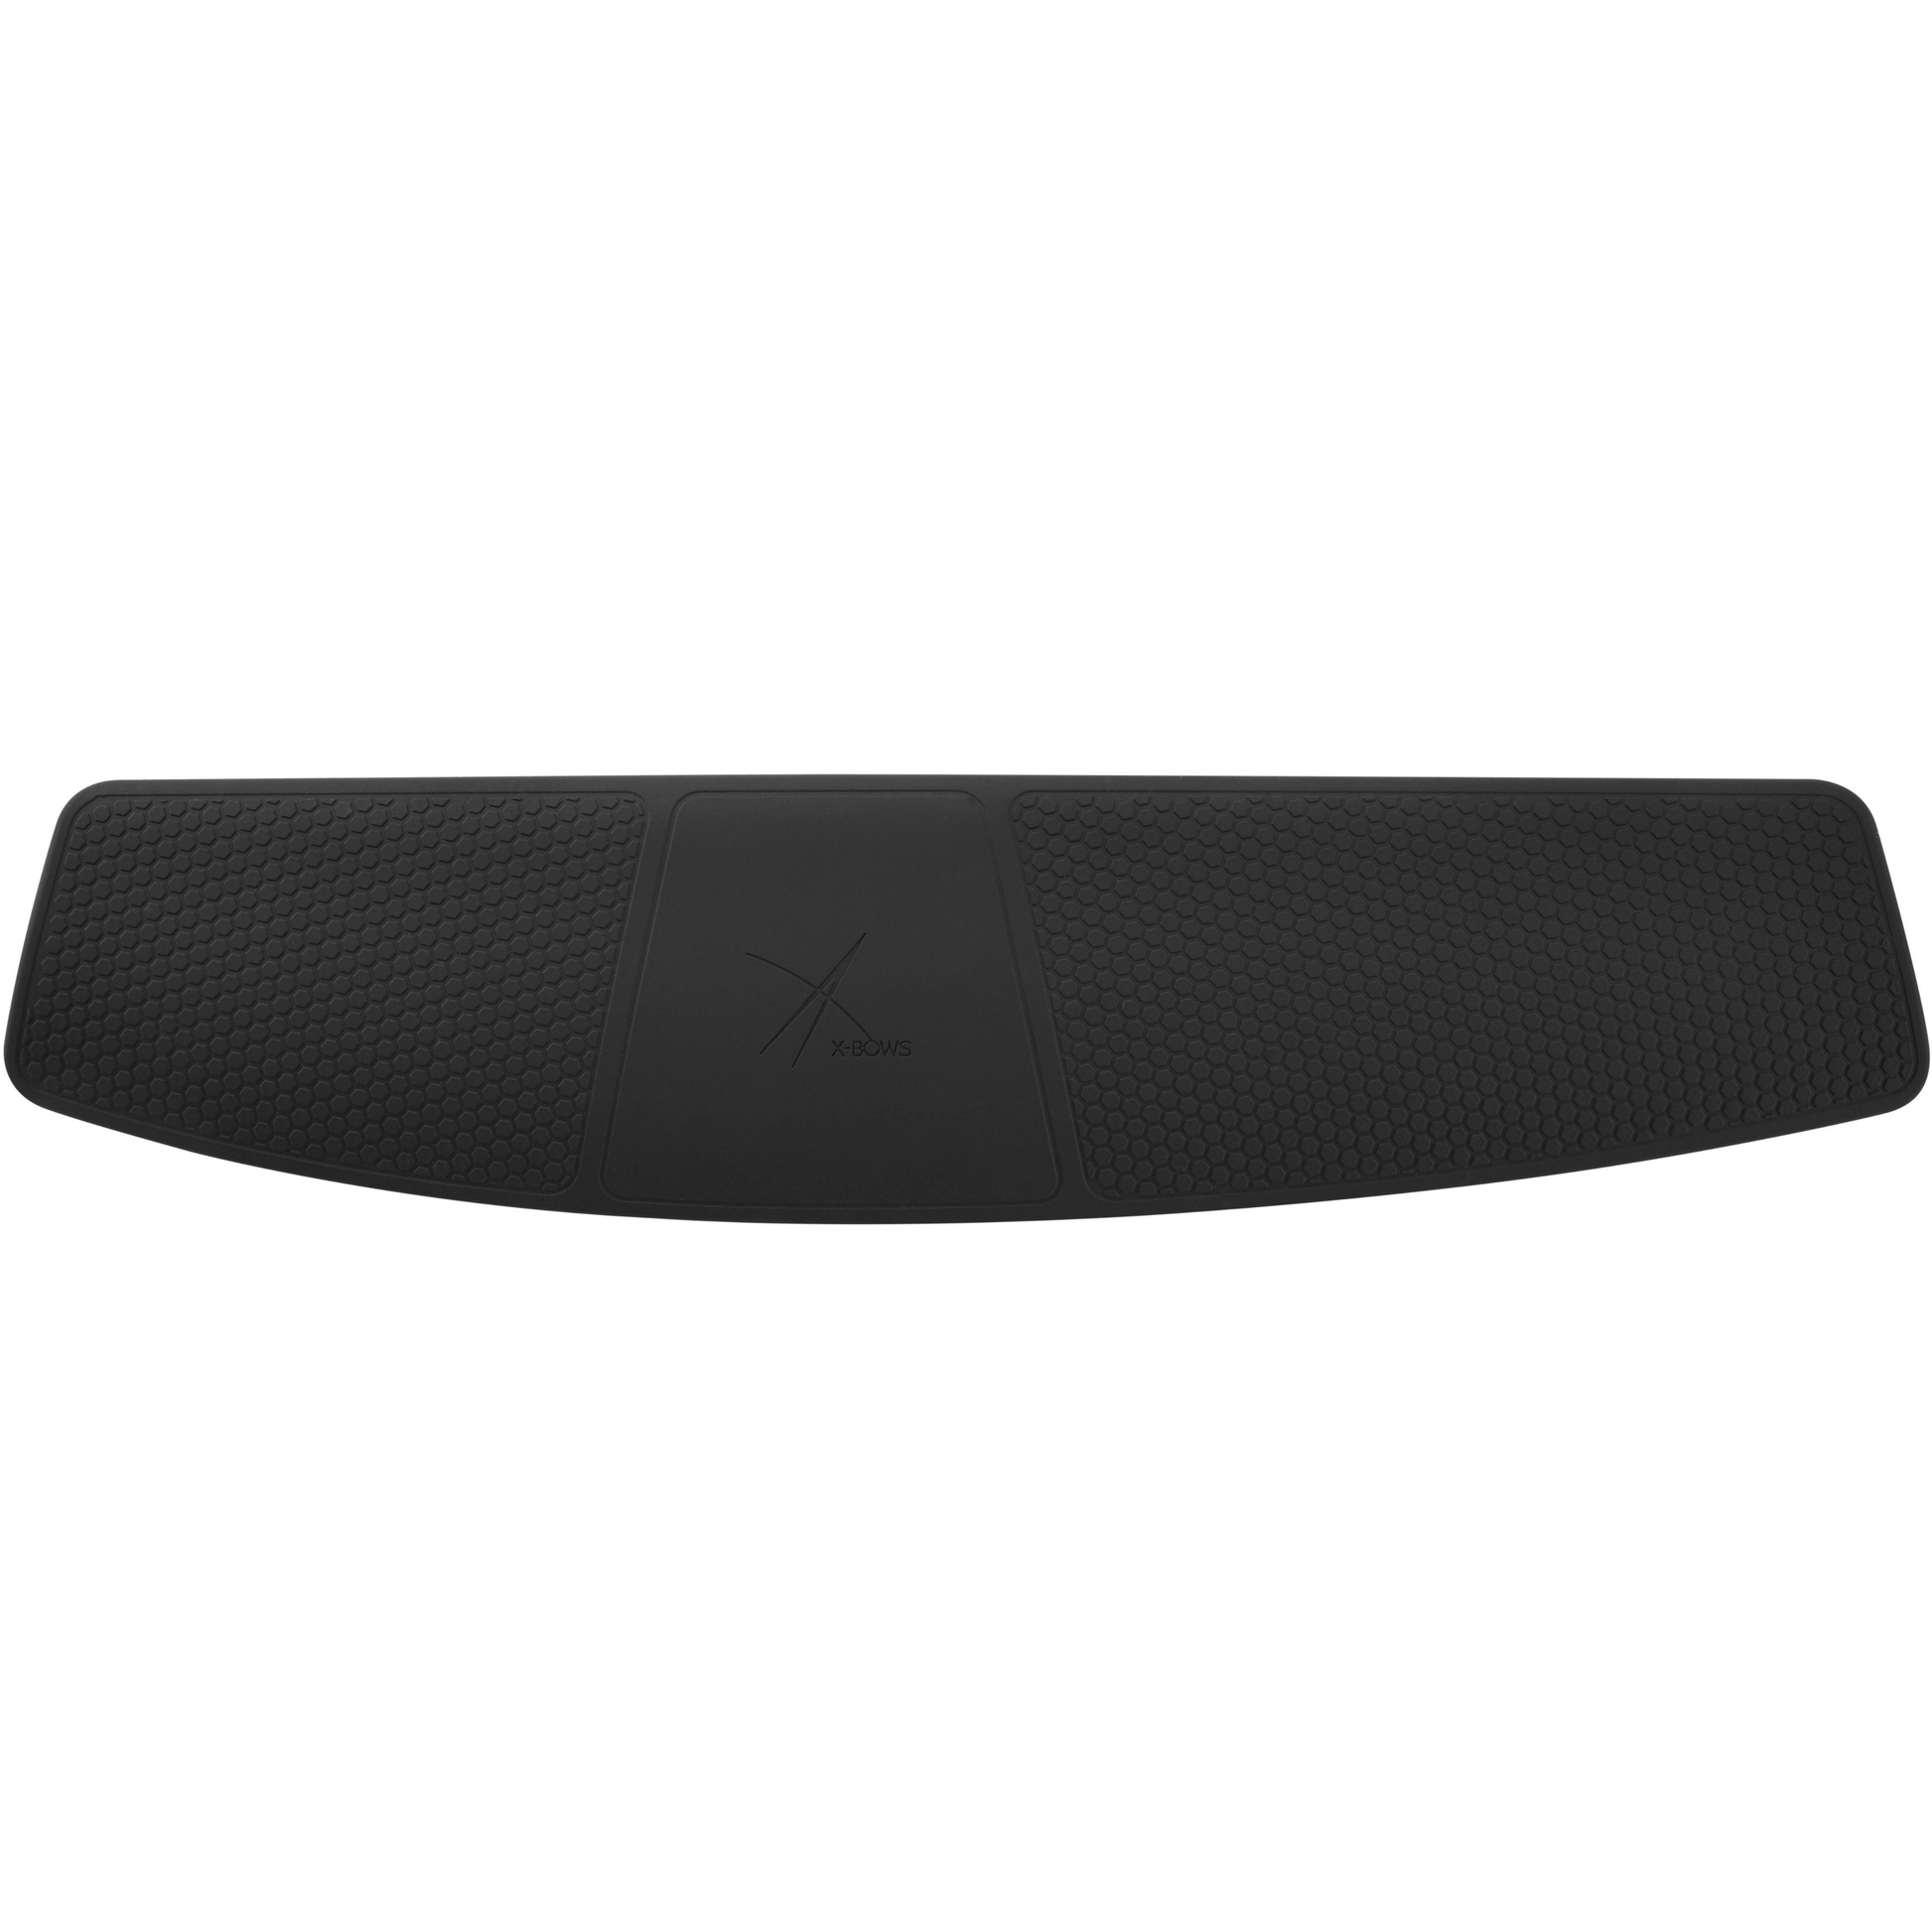 X-Bows Wrist Rest for Mechanical Keyboards